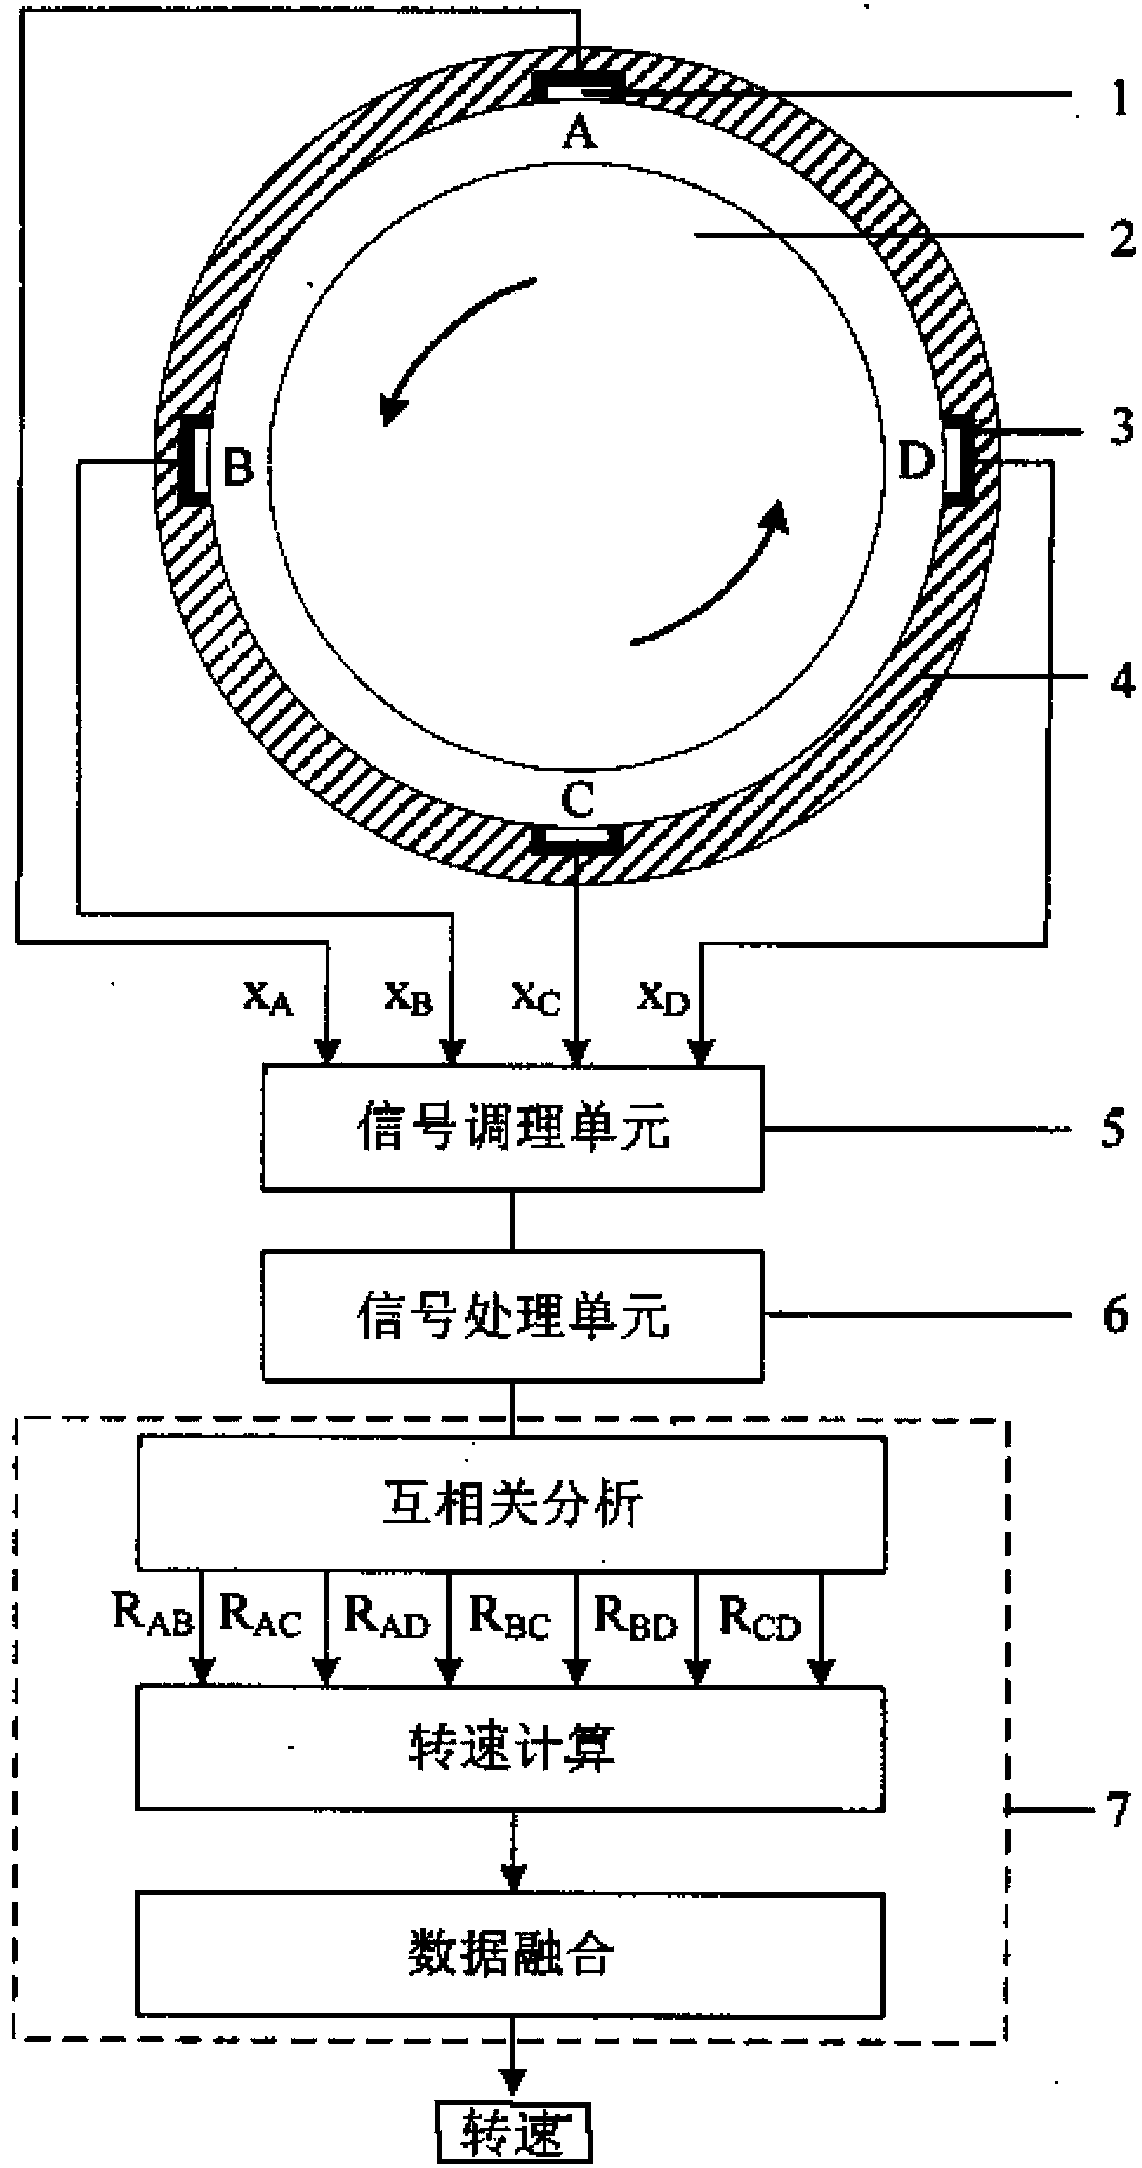 Device and method for measuring rotational speed on basis of electrostatic sensor array and data fusion